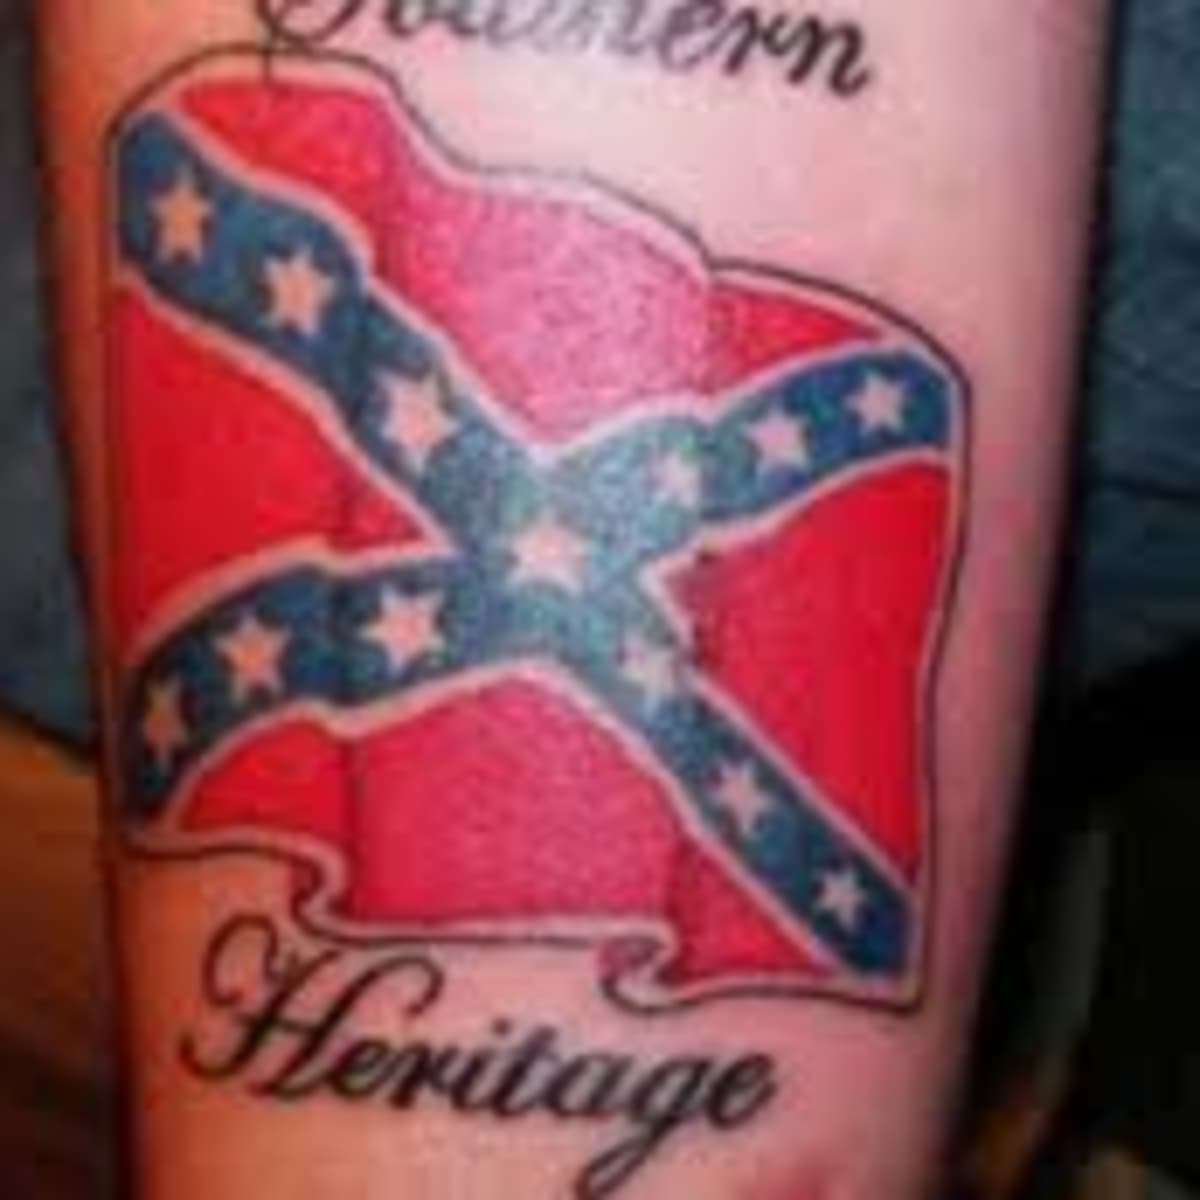 Confederate Flag Tattoos And Meanings - HubPages